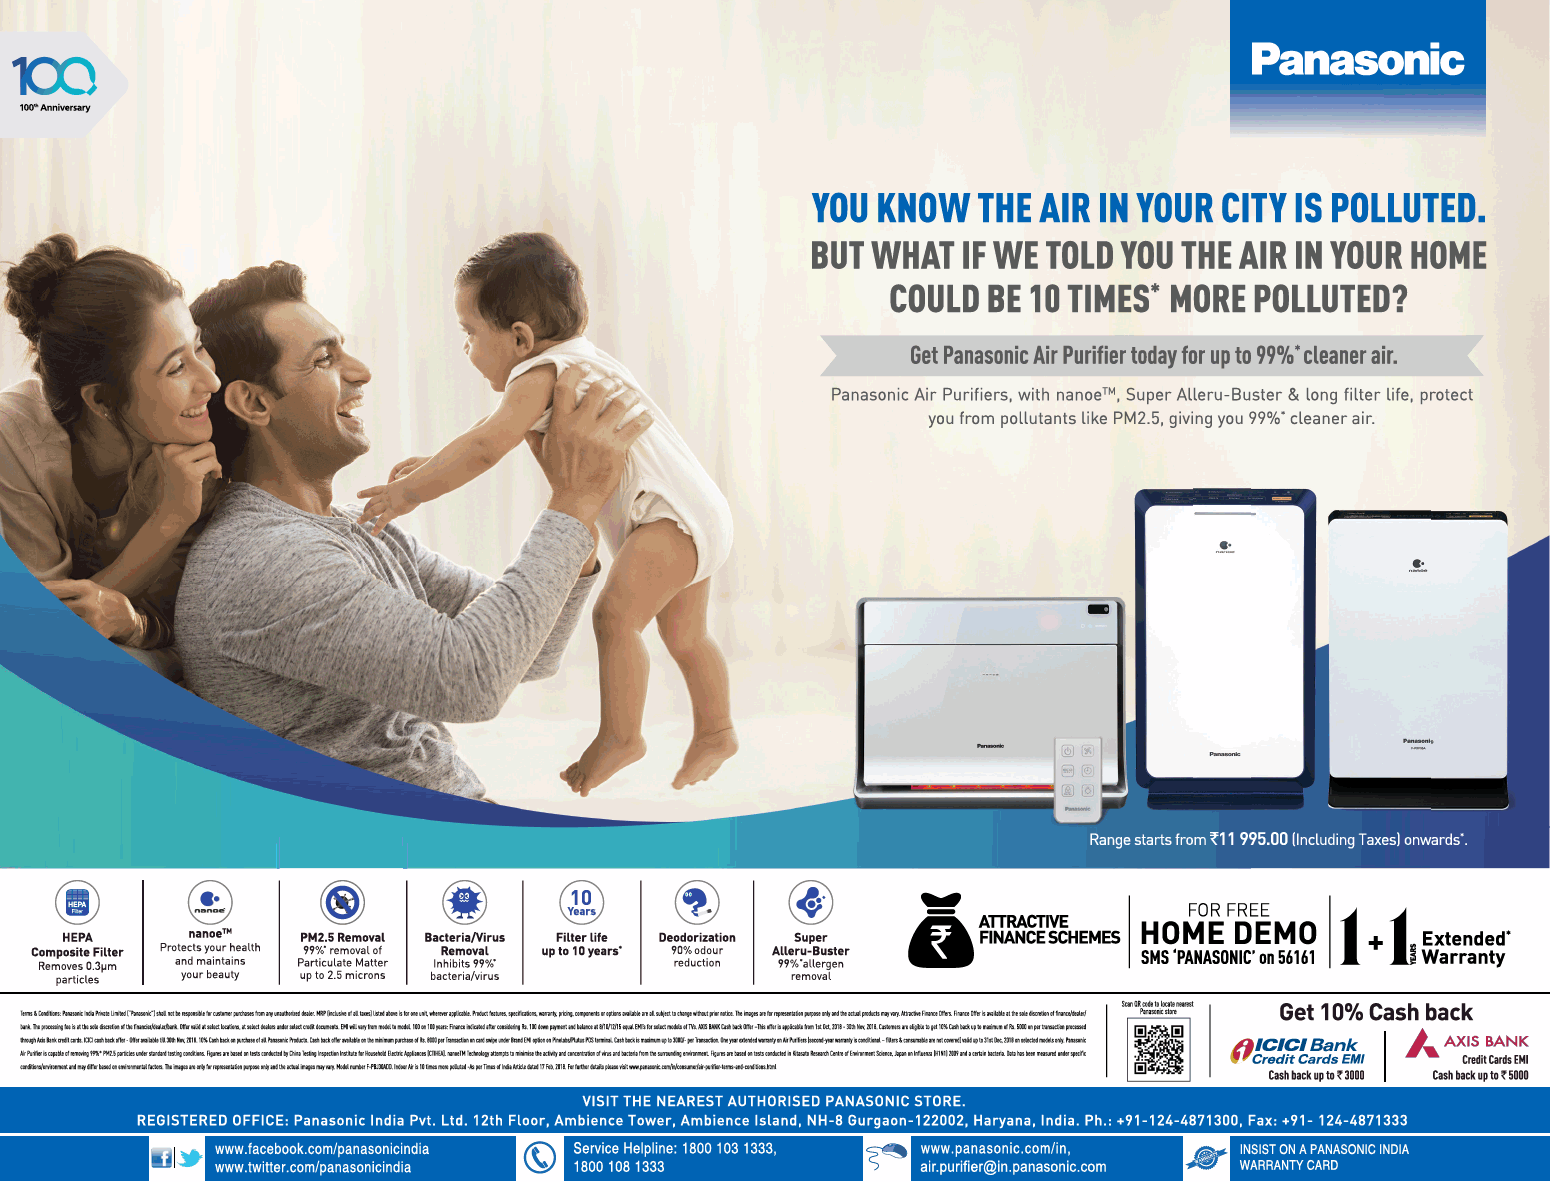 panasonic-you-know-the-air-in-your-city-is-polluted-ad-delhi-times-24-11-2018.png